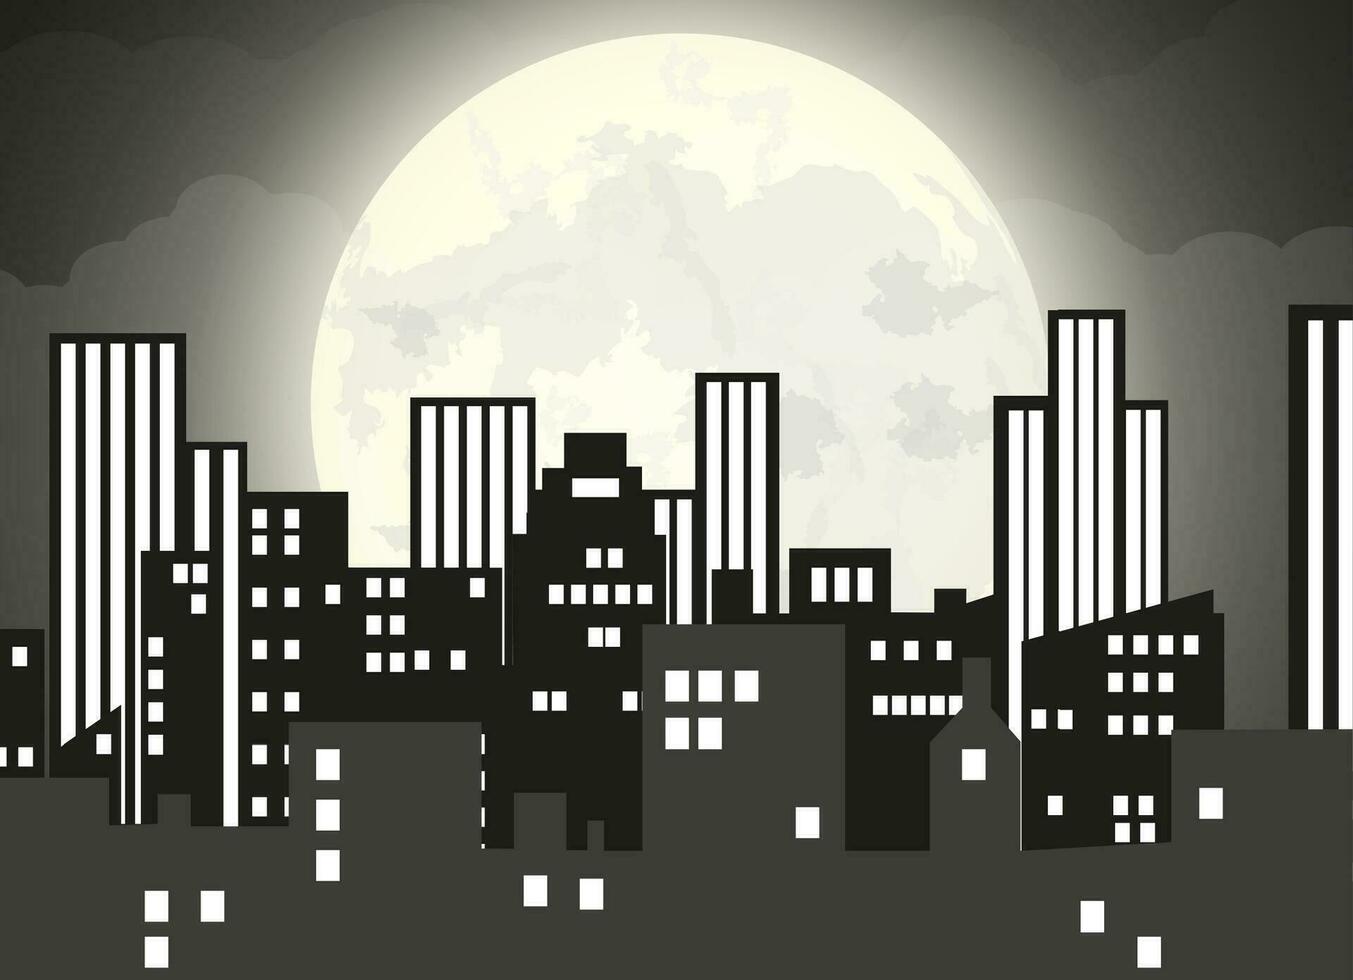 Silhouette of the city with cloudy night sky, stars and full moon. vector illustration